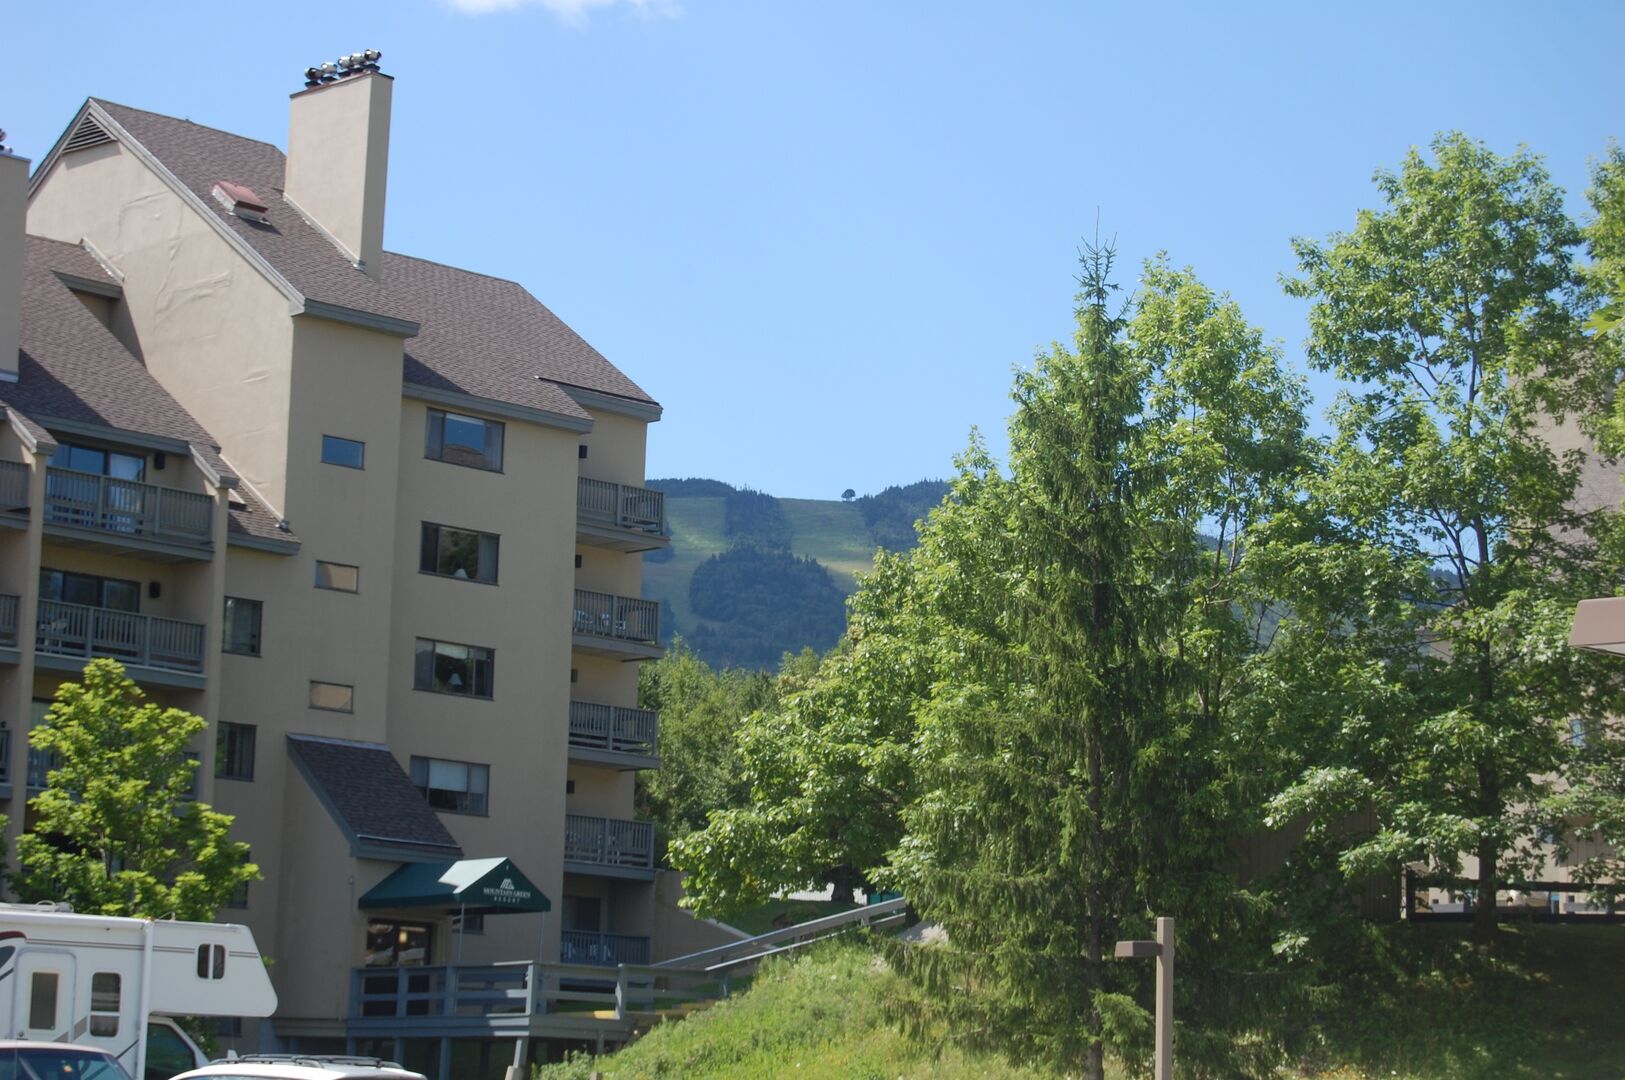 View of Killington and Building 1 in the summer